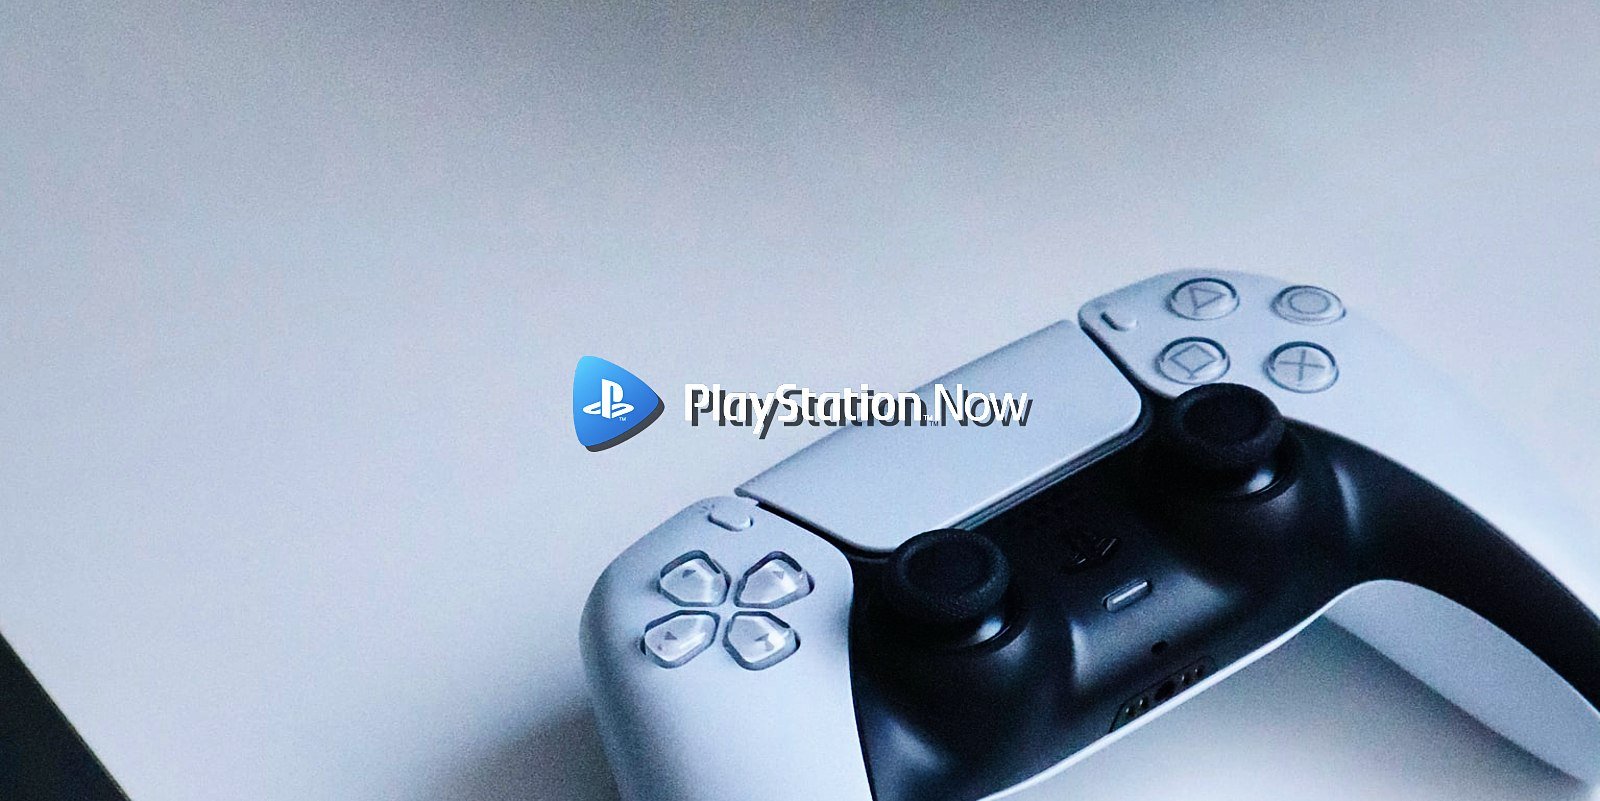 PlayStation Now bugs let sites run malicious code on Windows PCs